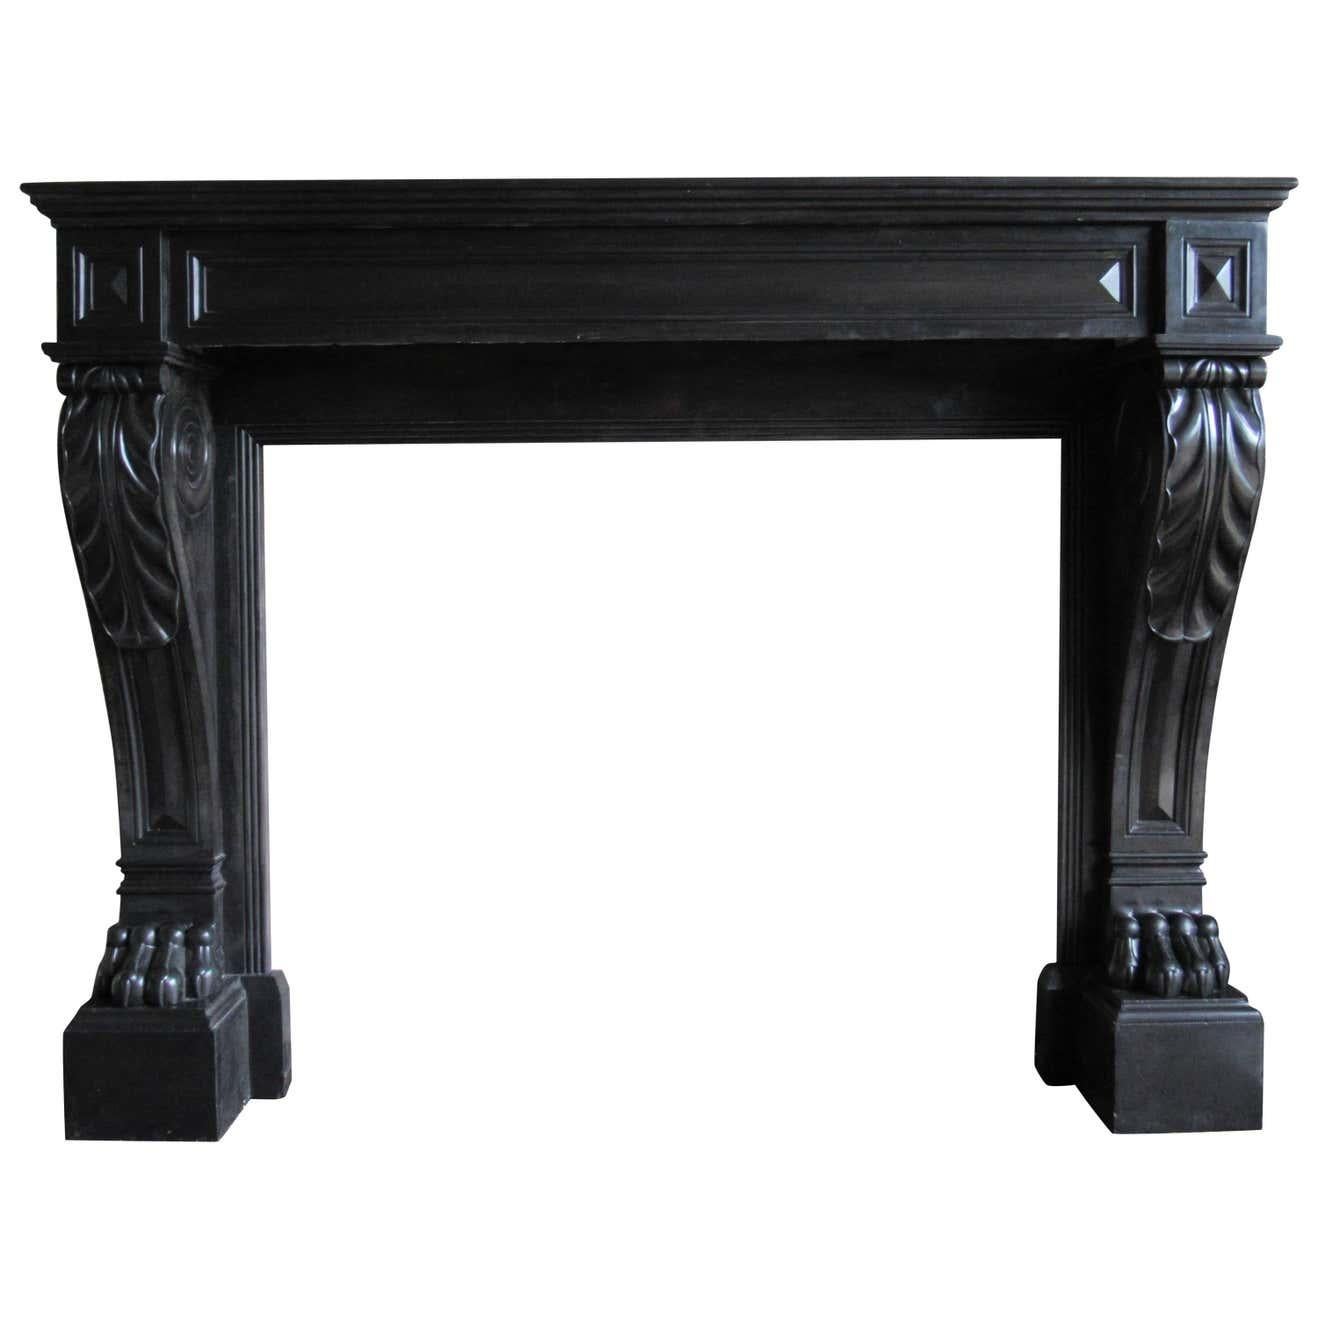 A 19th century (dated 1813) French black Napoleon marble fireplace with panelled freeze and corner blocks on scrolled legs with acanthus leaf terminating on impressive lion paw supports.